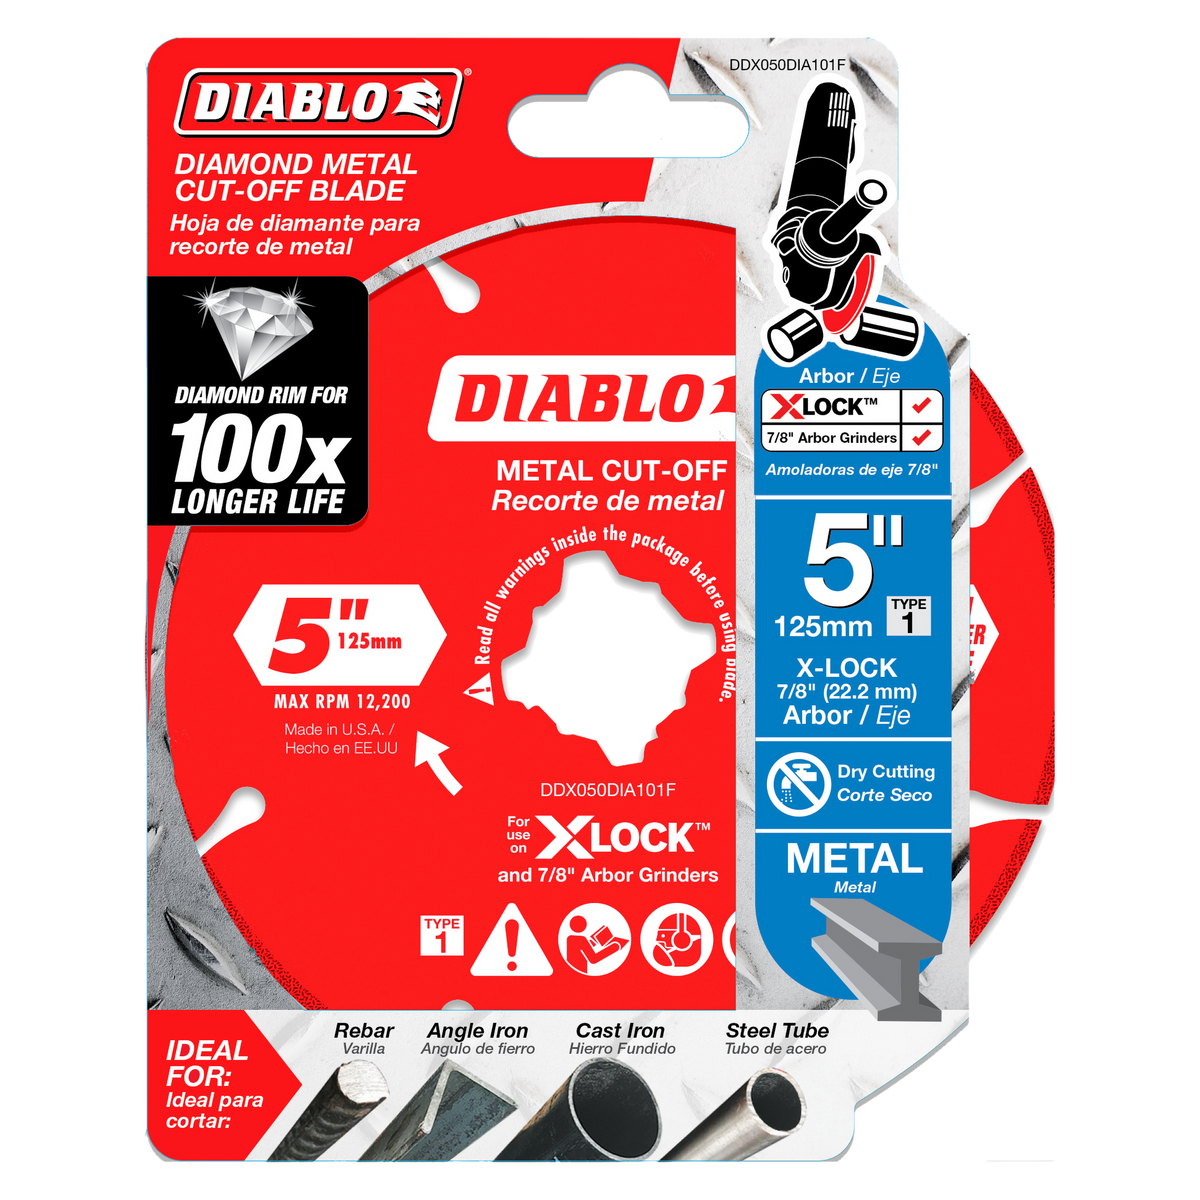 Diablo Diamond Rimmed Disc for Metal Cutting with X-Lock and All Grinders